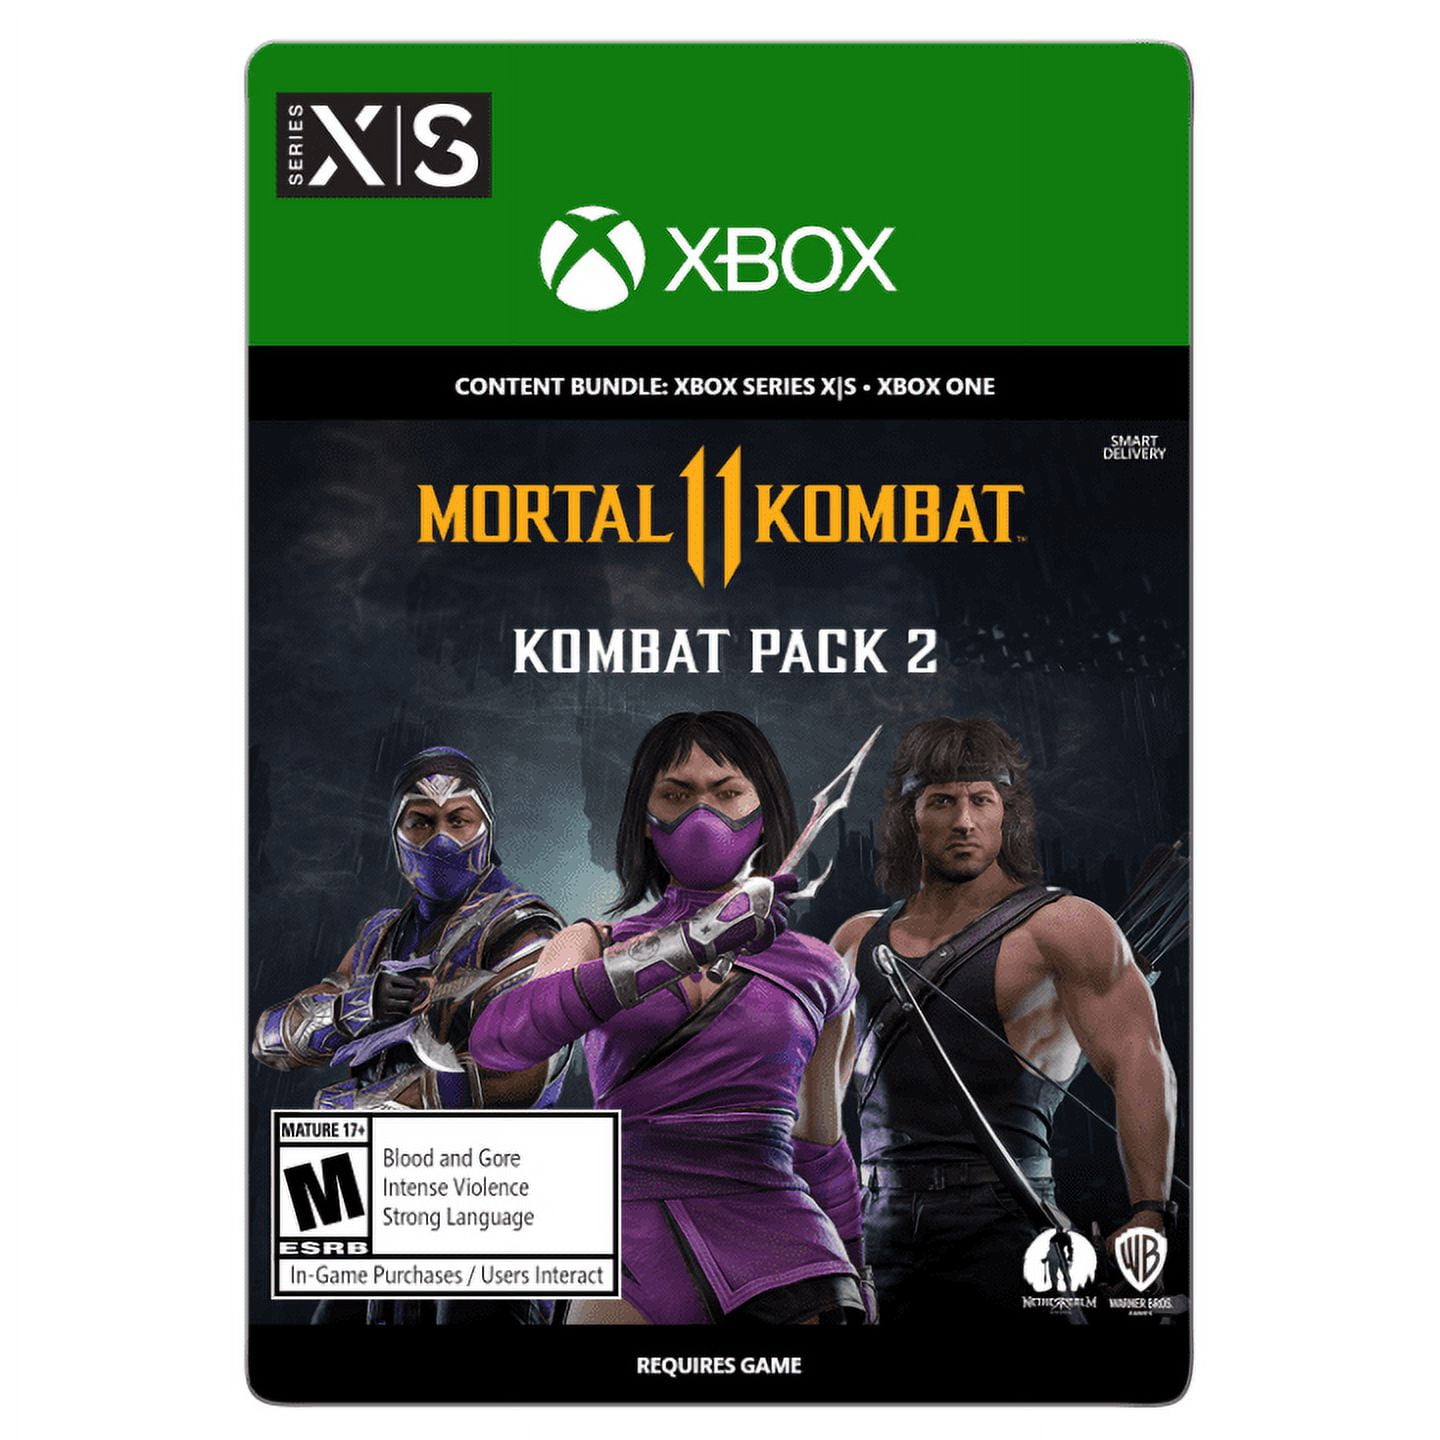 What is included in the Kombat Pack 1 and Kombat Pack 2? – Mortal Kombat  Games